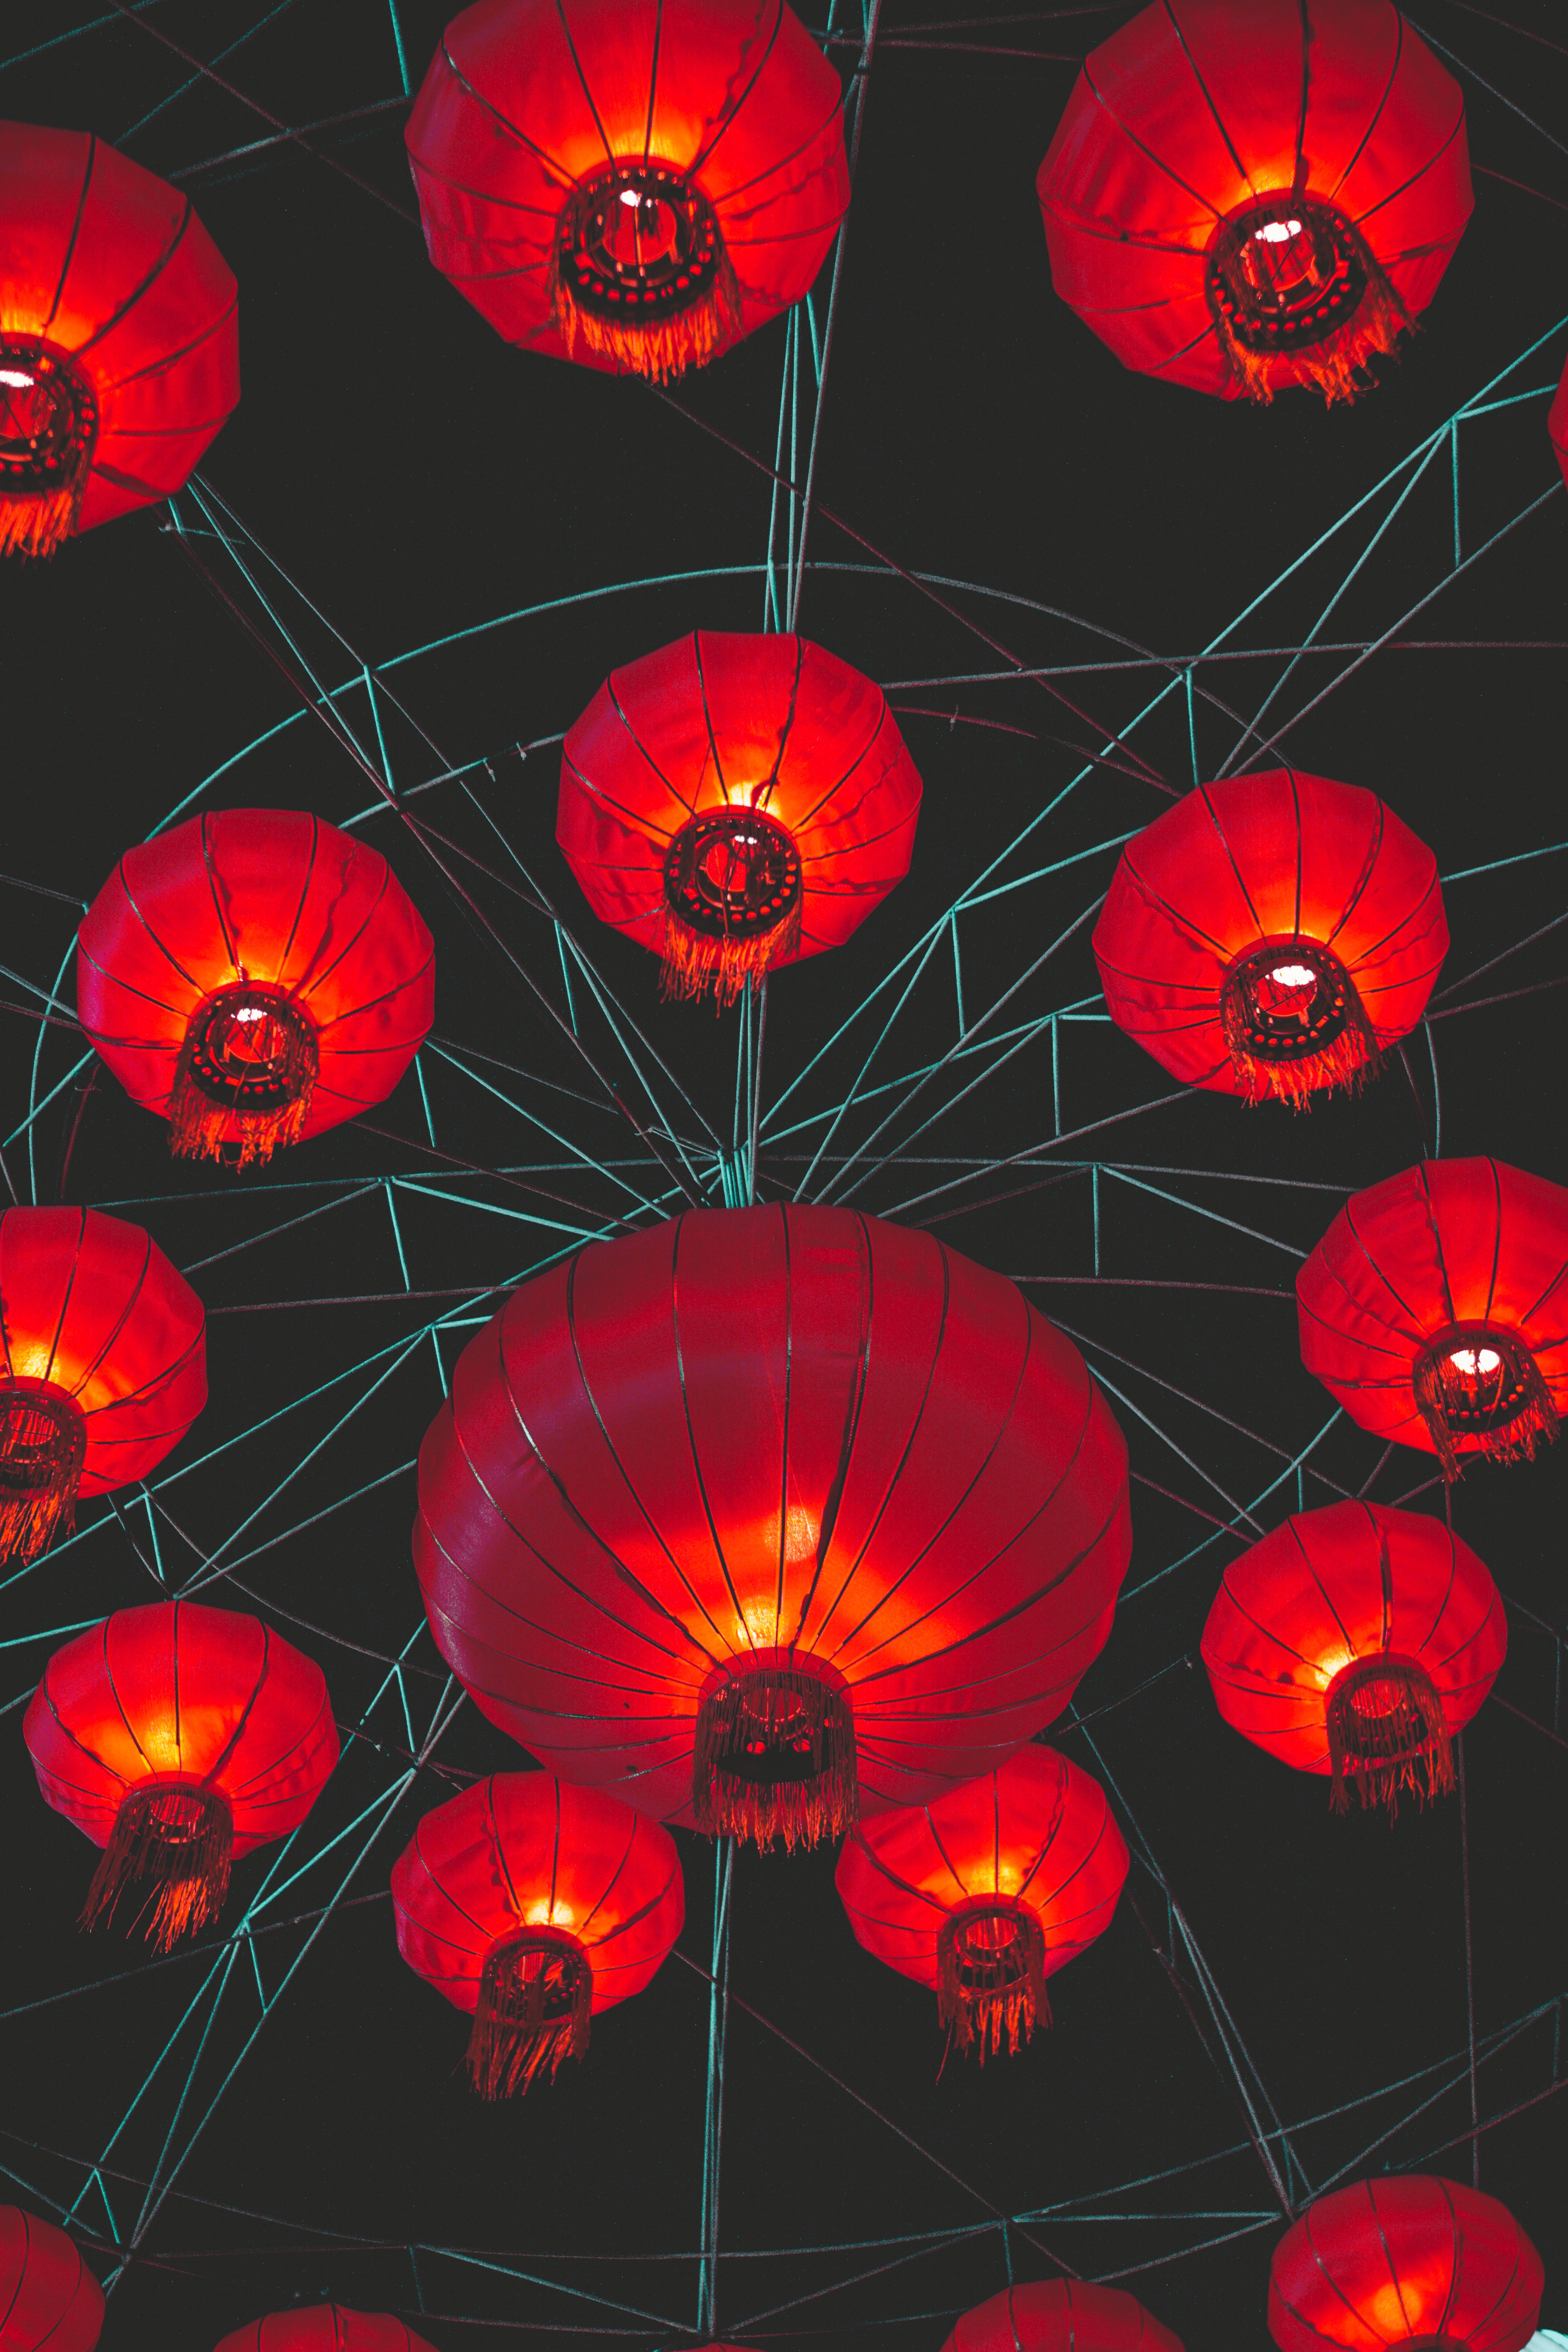 157763 1920x1200 PC pictures for free, download dark, chinese lanterns, lanterns, red 1920x1200 wallpapers on your desktop